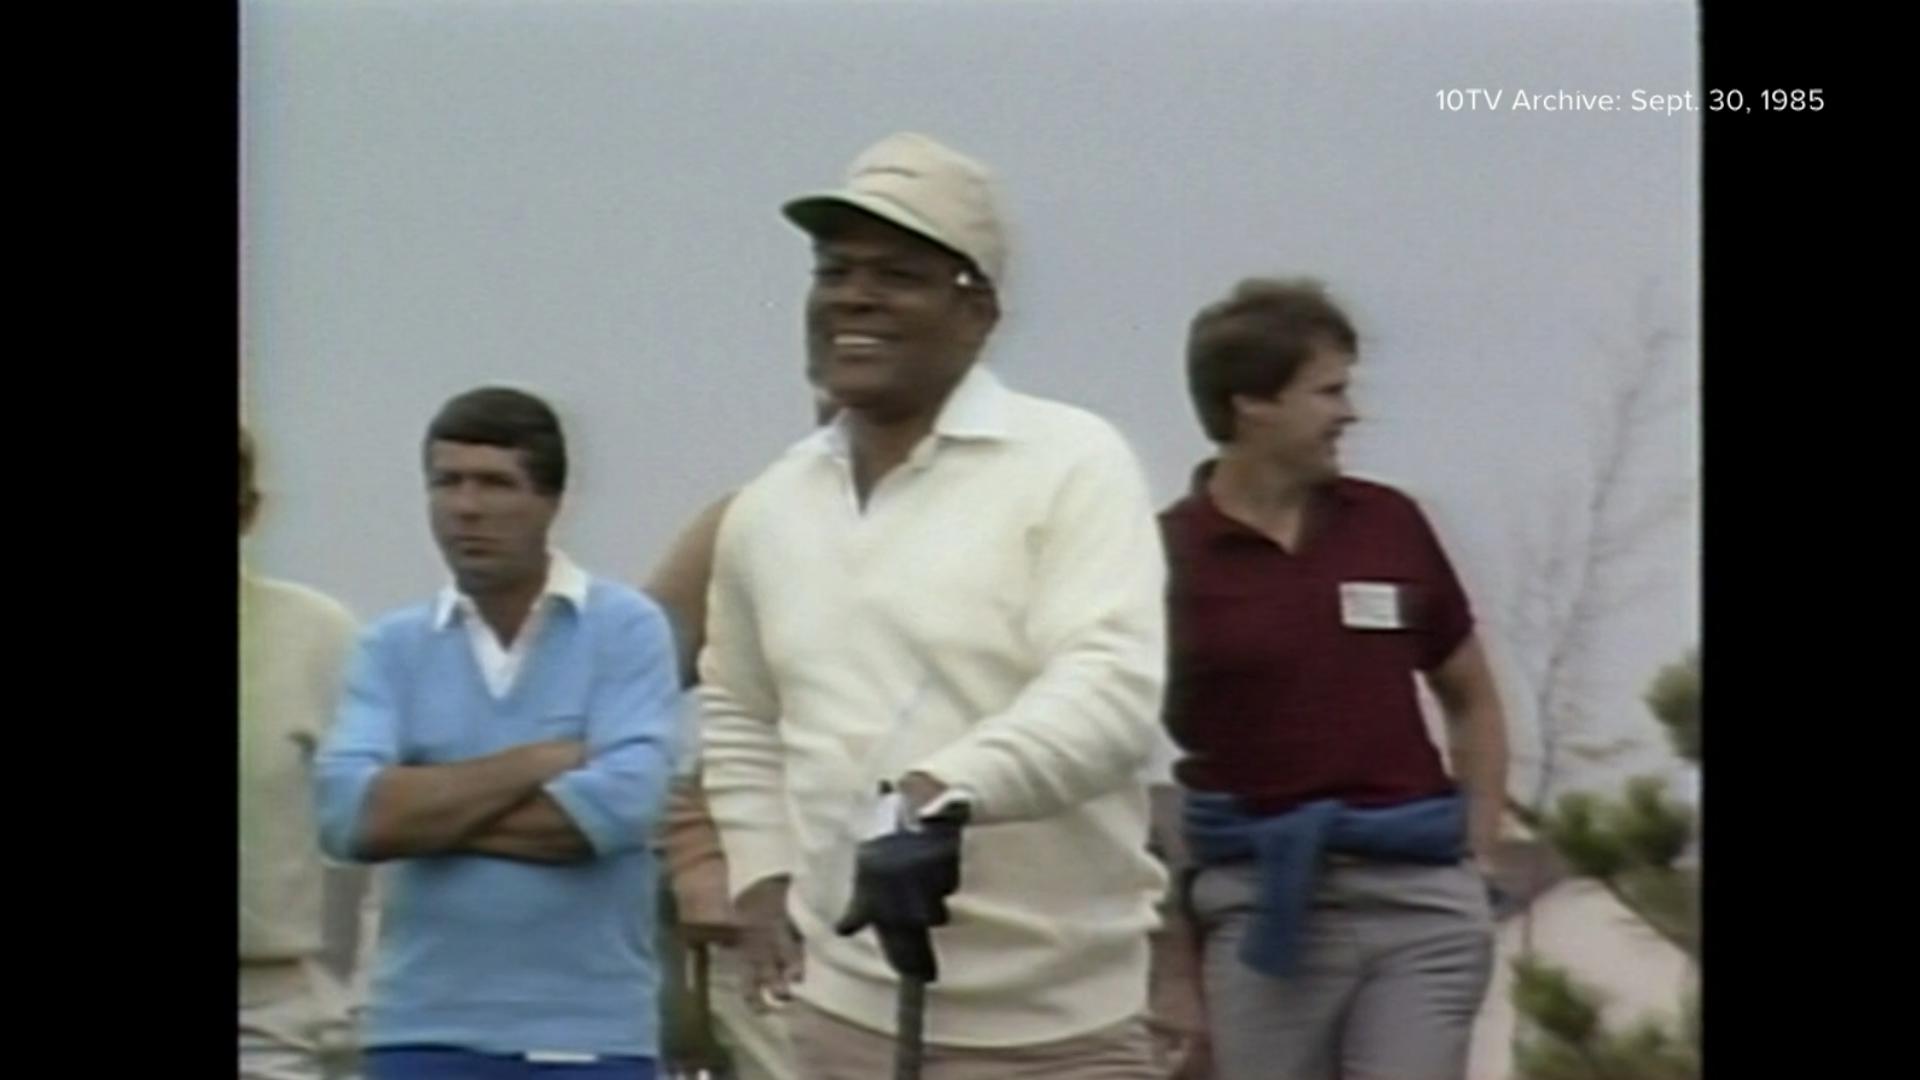 In this footage from the 10TV archive, Mays pays a visit to Dublin's Muirfield Village Golf Club for a charity event on Sept. 30, 1985.